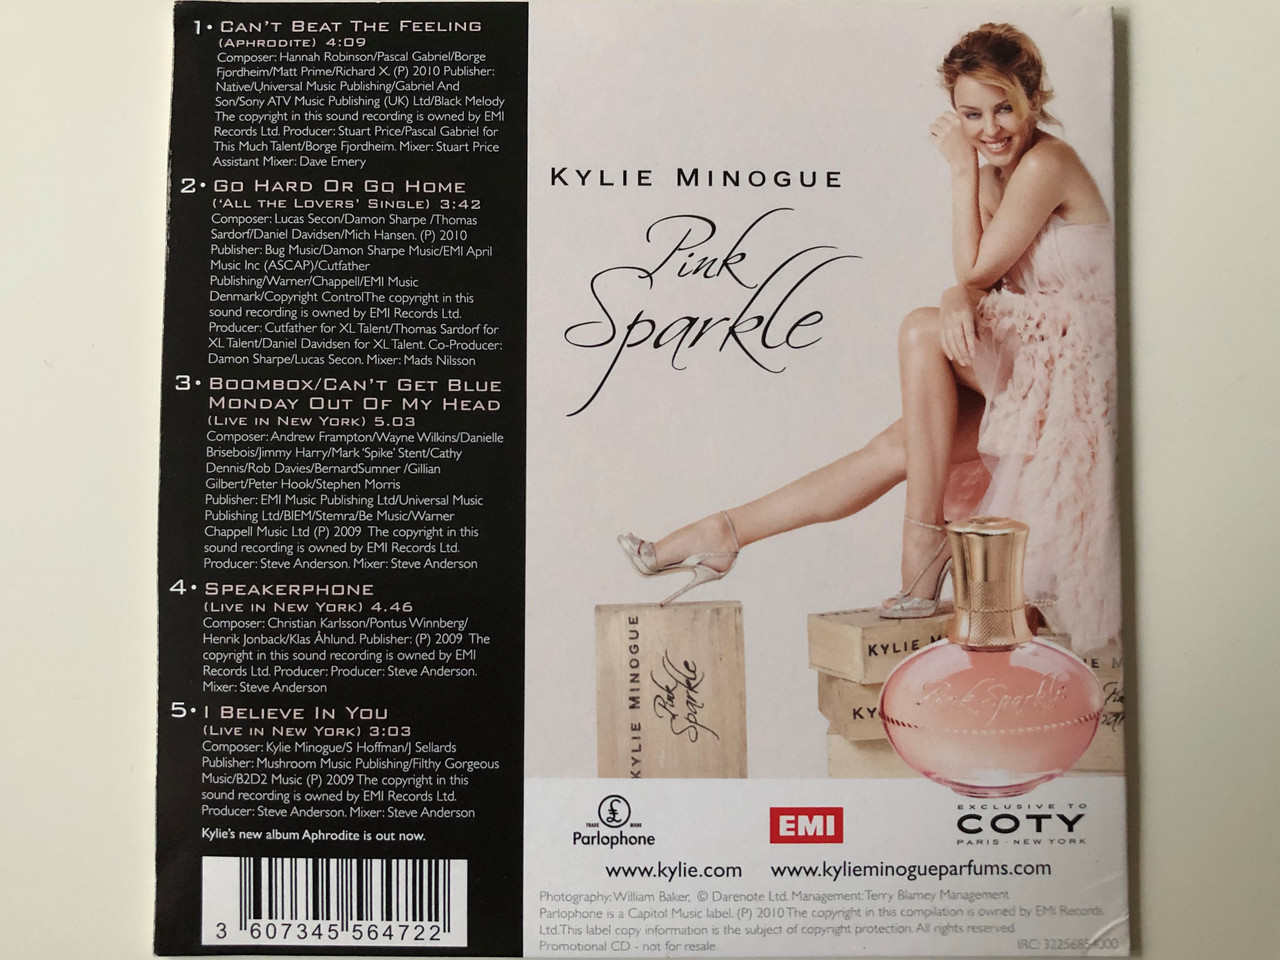 Kylie Minogue ‎– Pink Sparkle / The Exclusive CD / The Exclusive Fragrance  / Parlophone ‎Audio CD 2010 / 3607345564722 - bibleinmylanguage